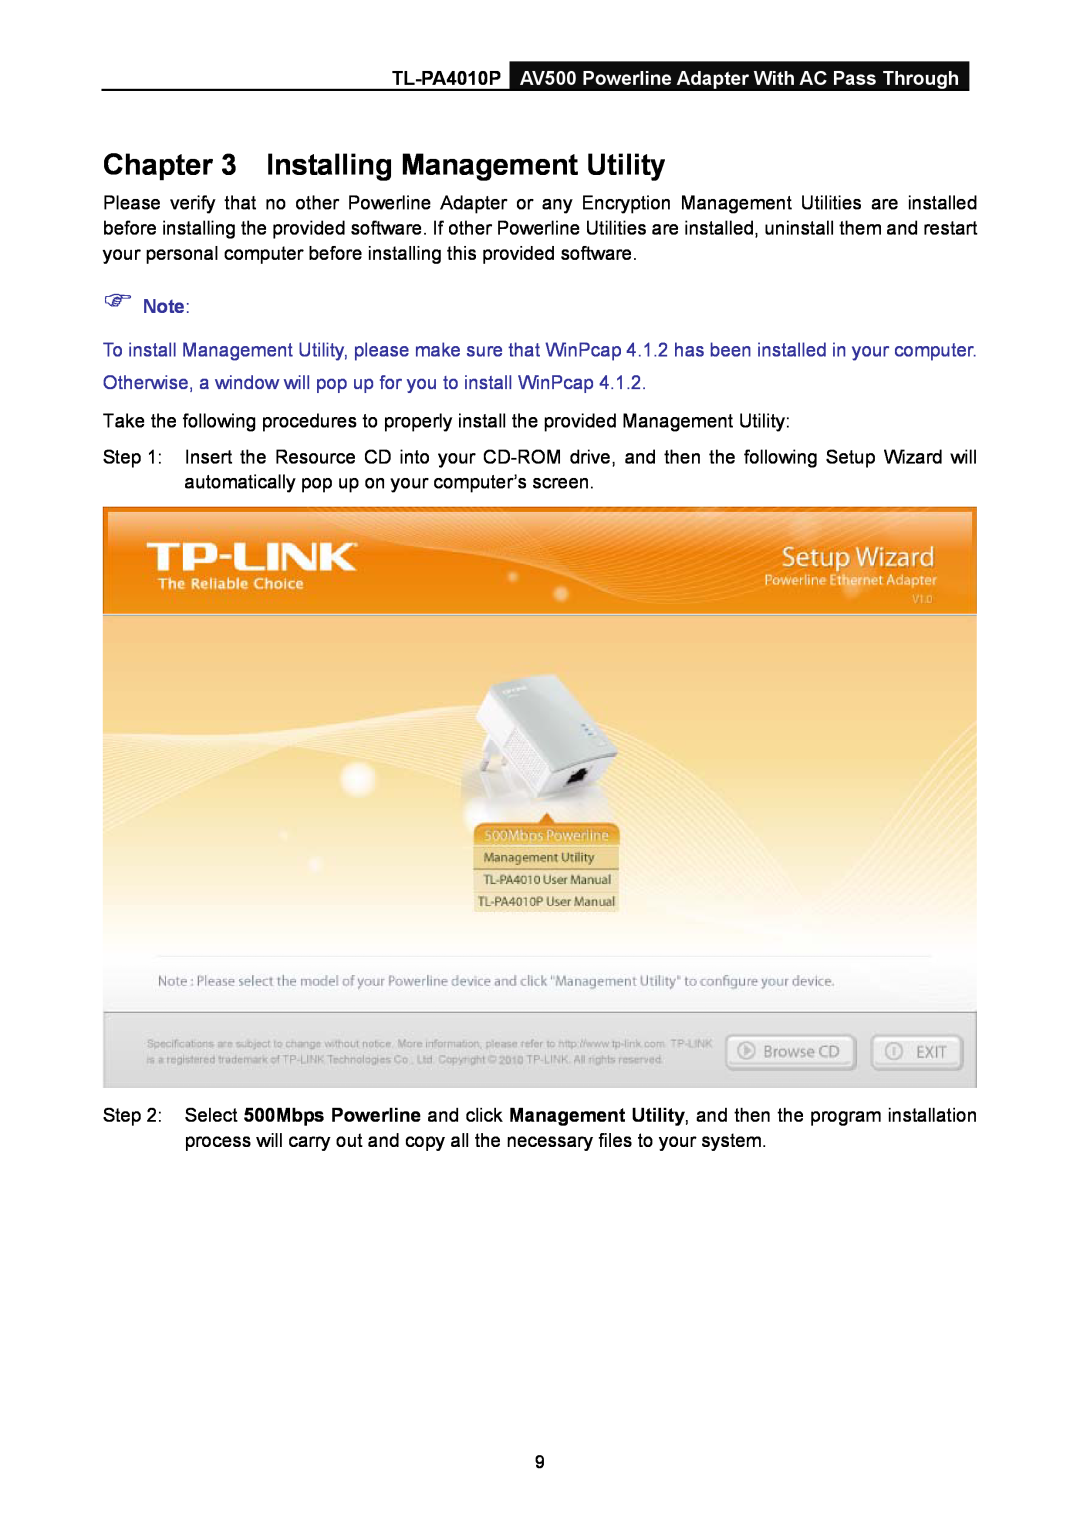 TP-Link manual Installing Management Utility, TL-PA4010P AV500 Powerline Adapter With AC Pass Through,  Note 